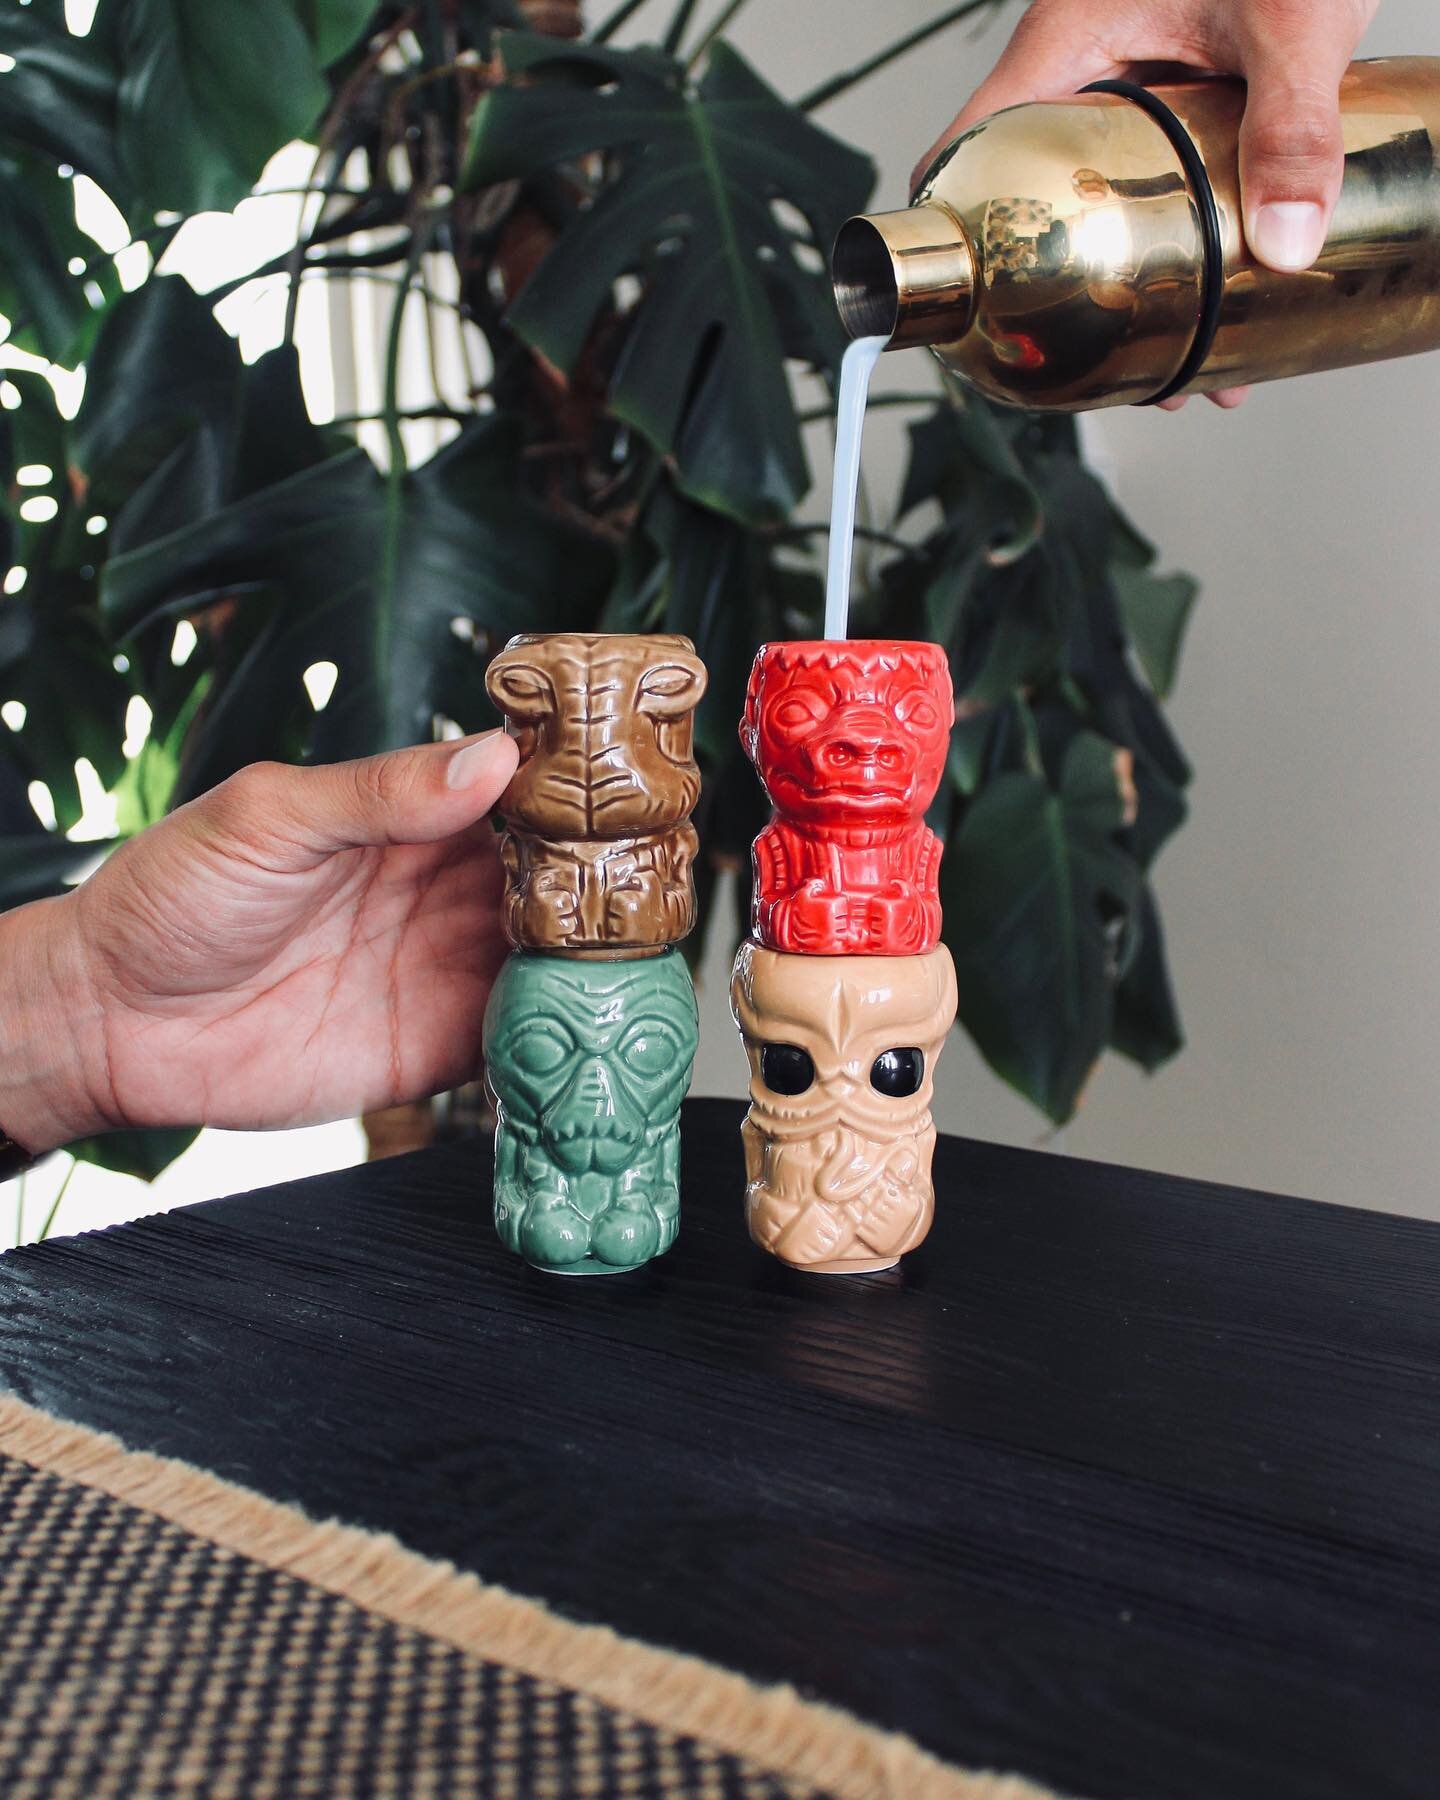 Servin&rsquo; up some blue milk shots at the Mini Bungalow today! Mahalo to our friend @_kristig for gifting us with these @starwars tiki muglets from #SDCC2022 this past weekend. They&rsquo;re cute and perfect for sippin&rsquo; some blue milk! We wa